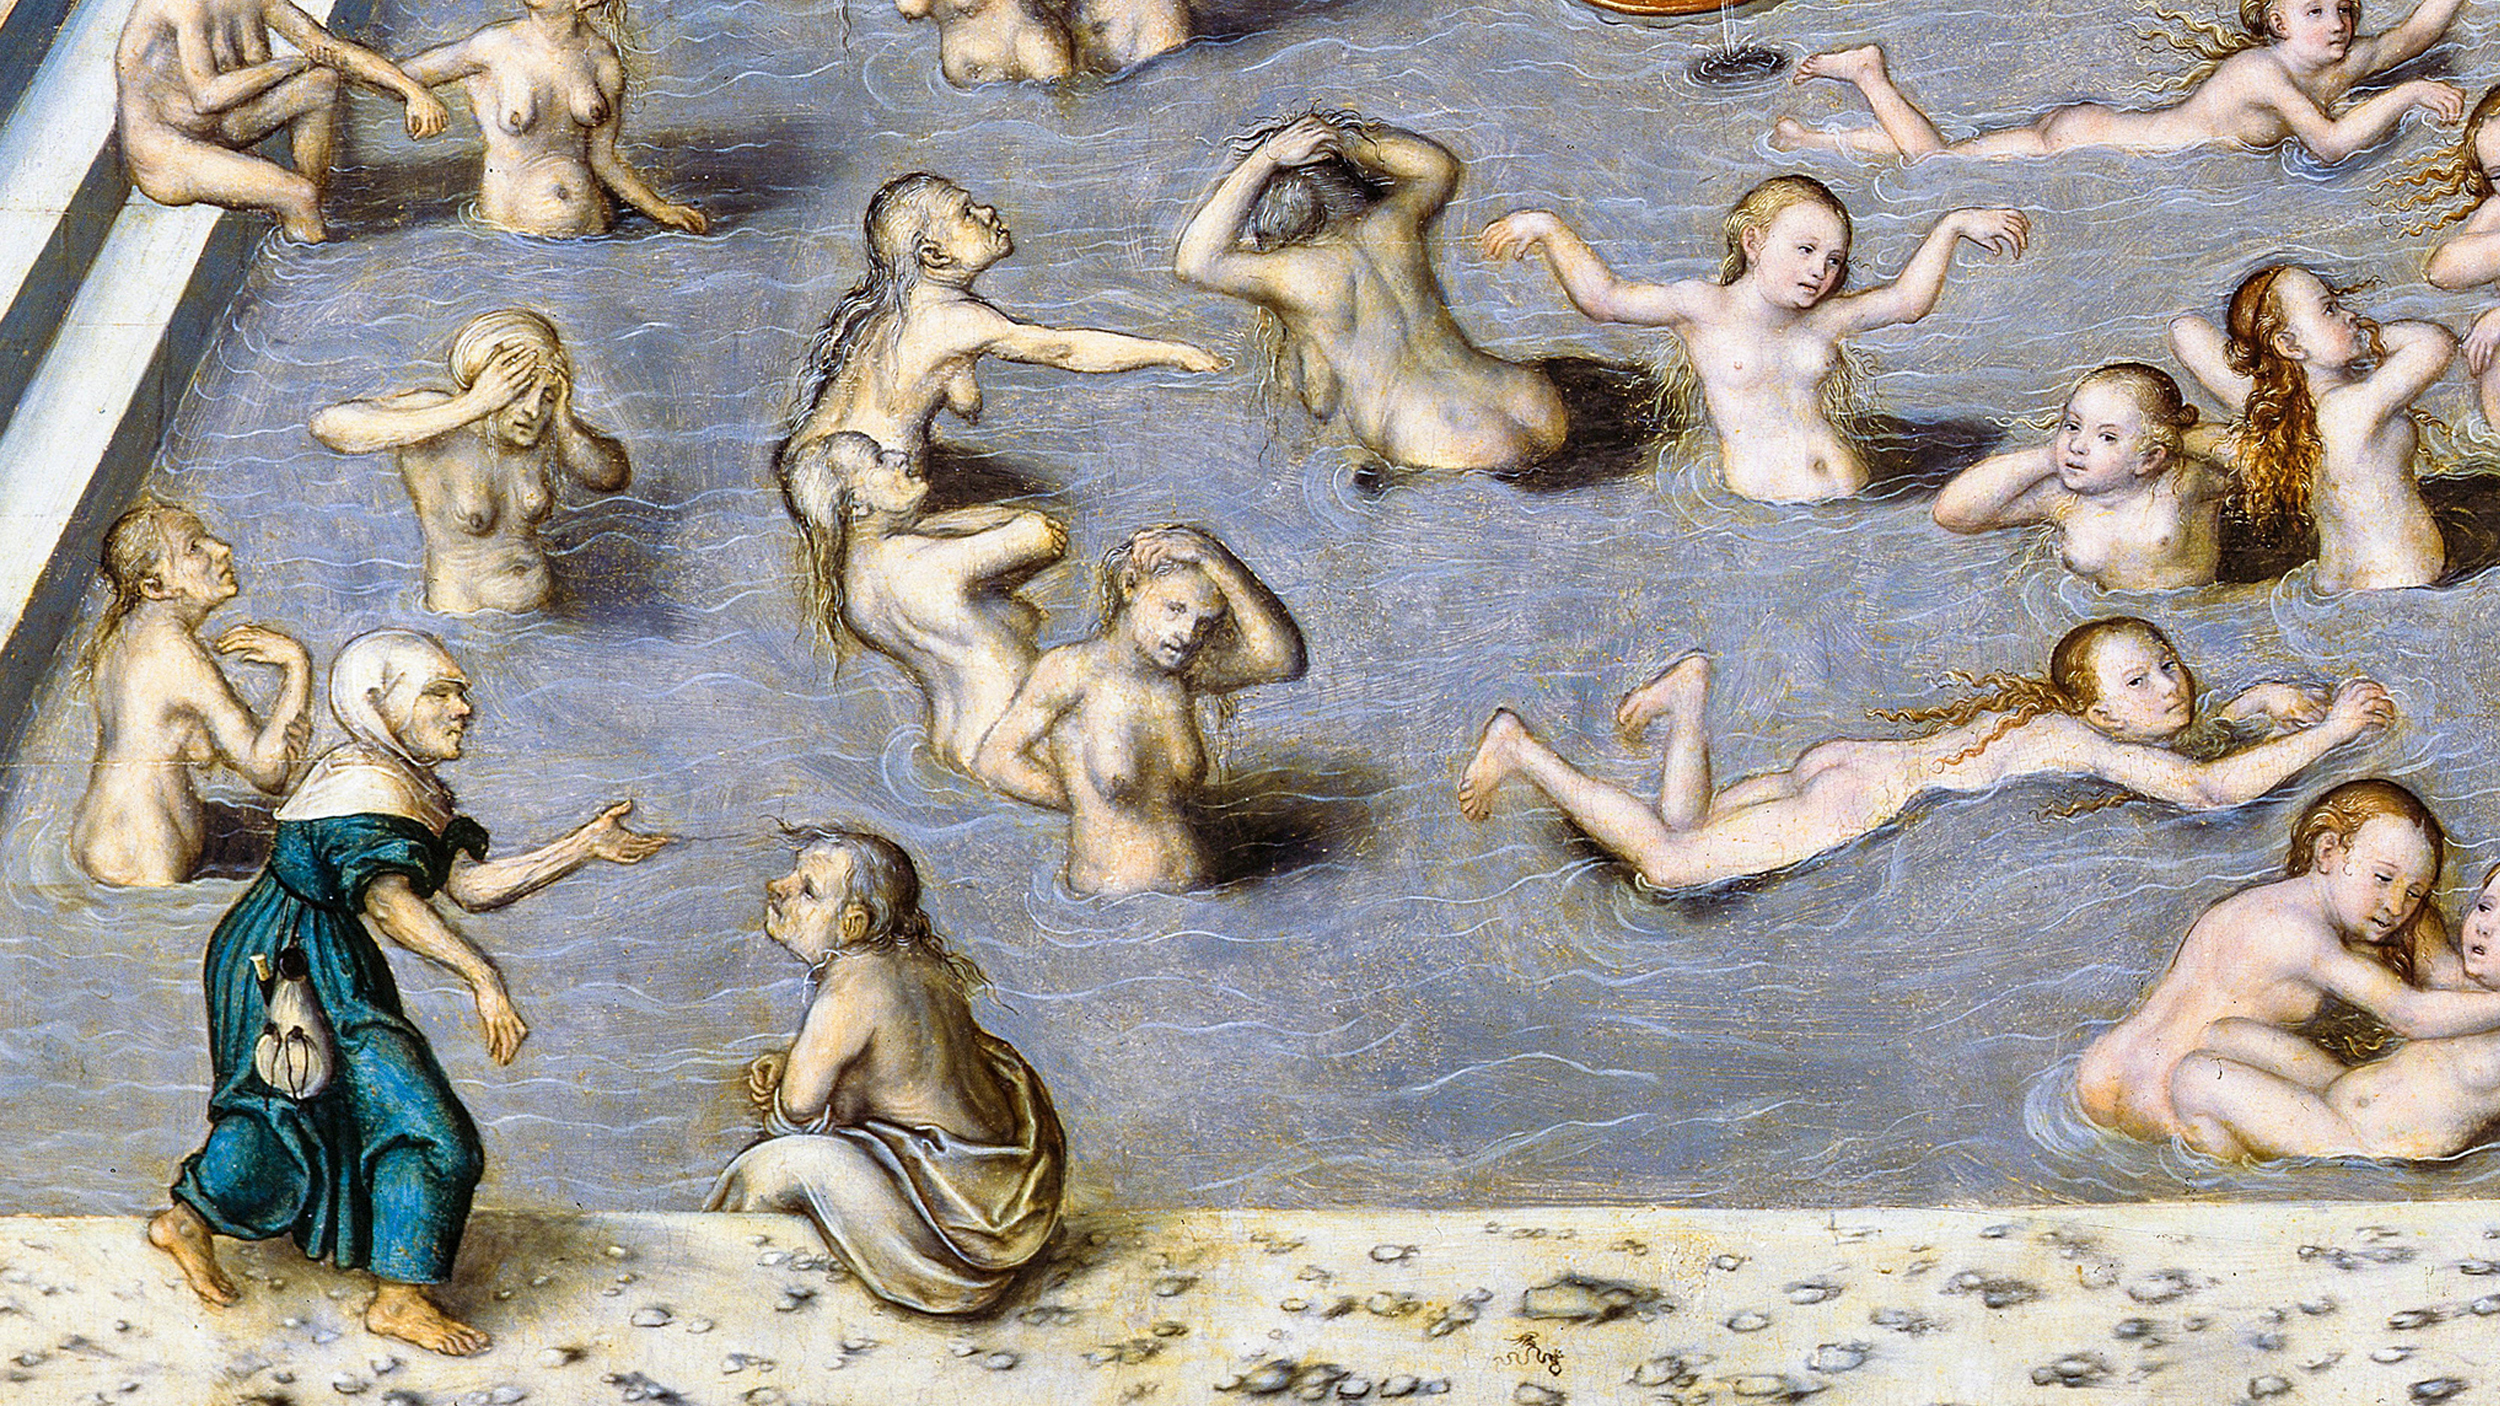 A painting exploring philosophical problems through a depiction of naked people in a pool.